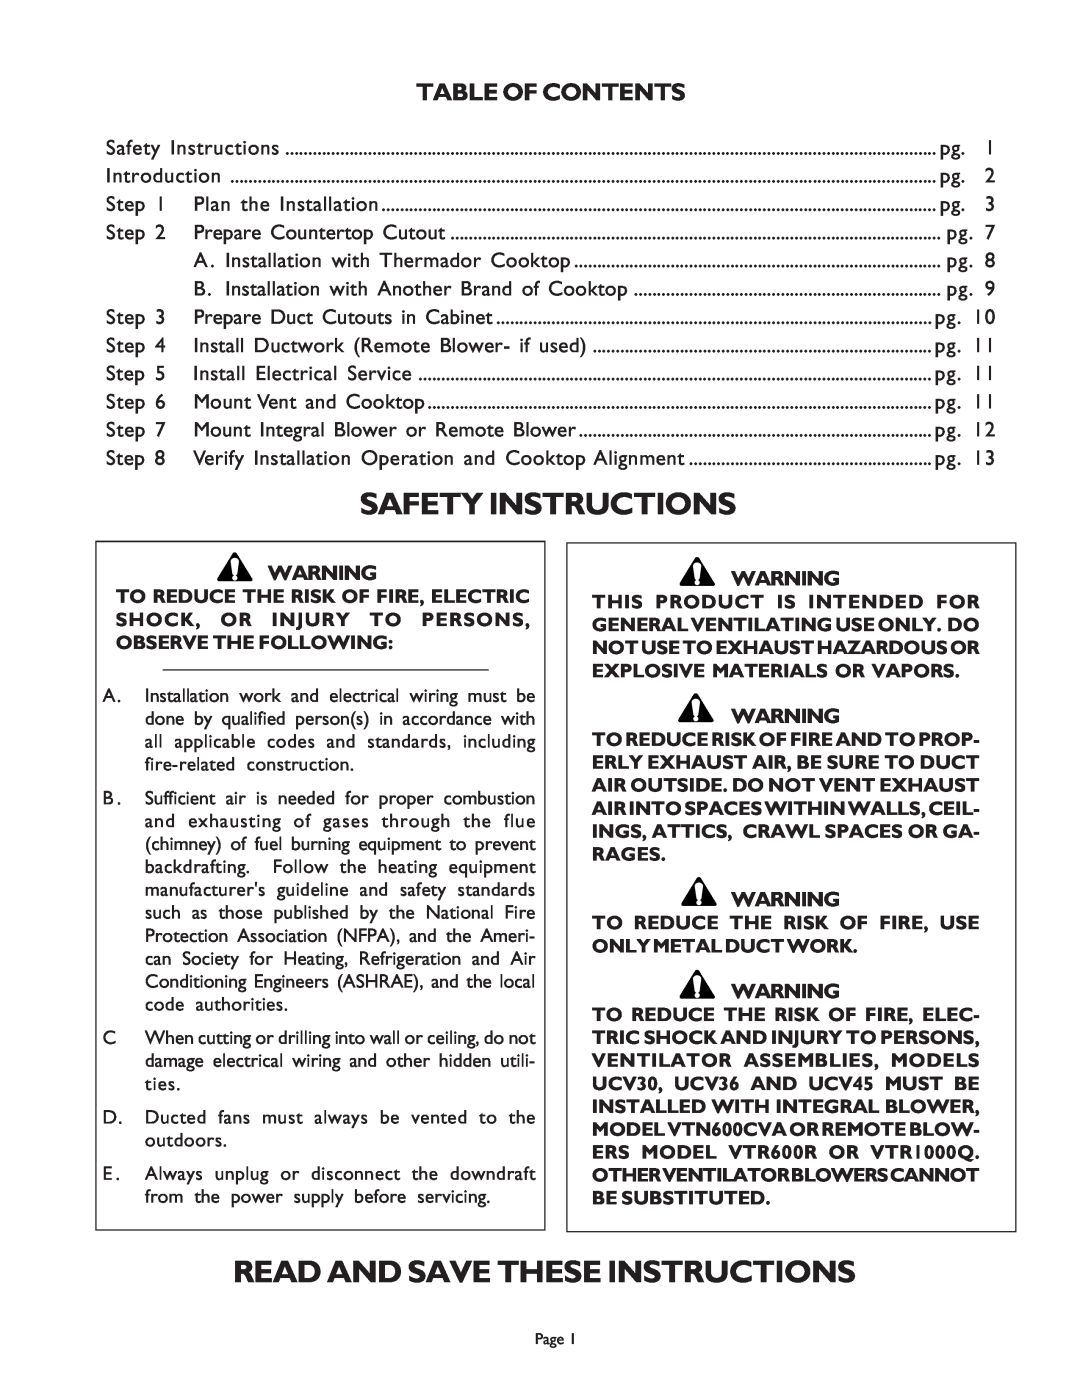 Thermador UCV30, UNIVERSAL COOK'N'VENT, UCV45, 98 Safety Instructions, Read And Save These Instructions, Table Of Contents 